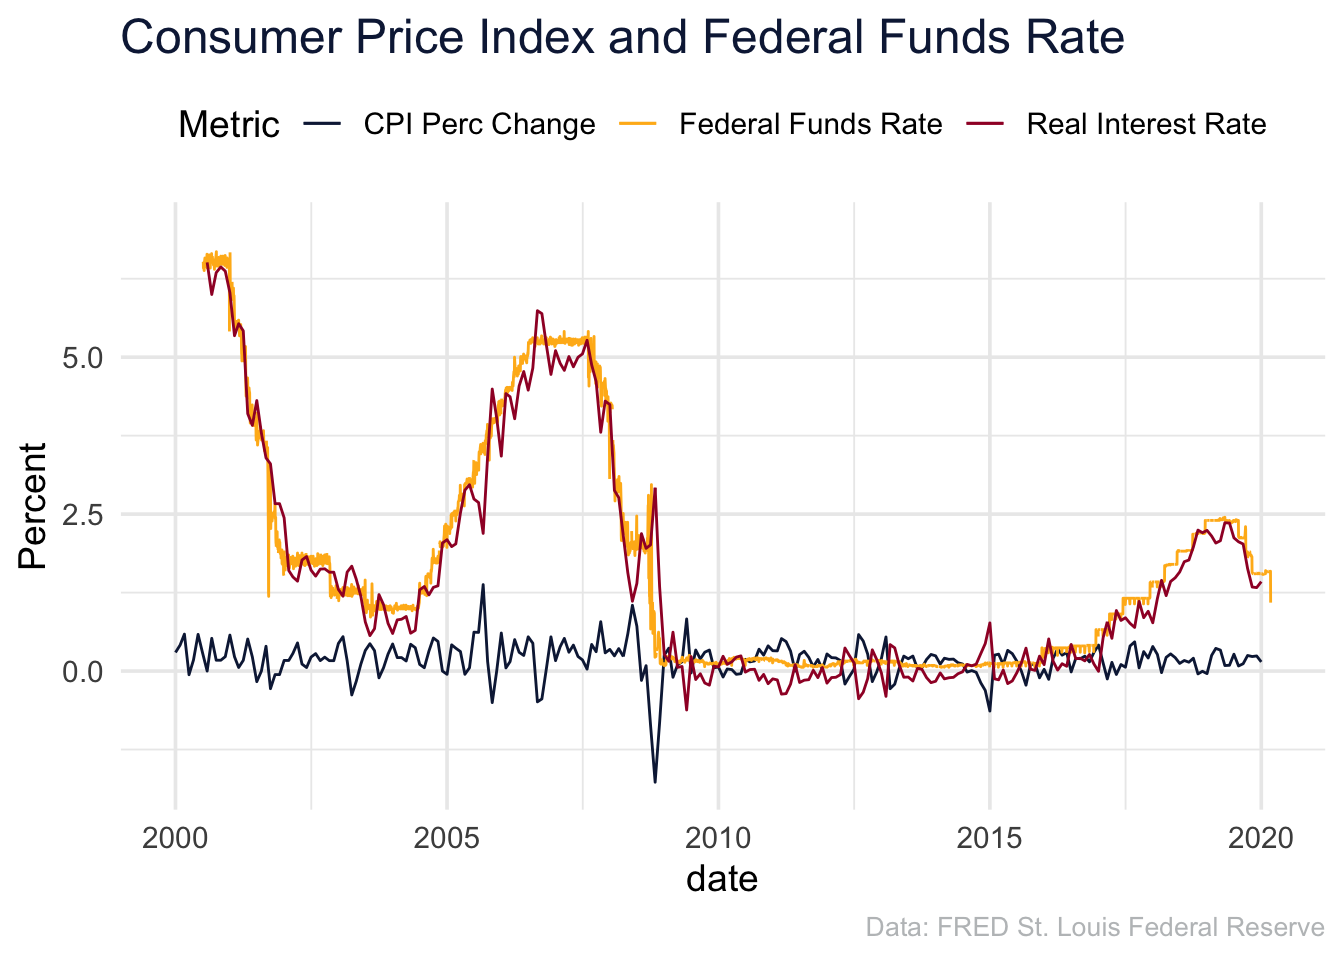 Plot of Federal Funds Rate, Real Interest Rate, and CPI (% Change), Since 2000